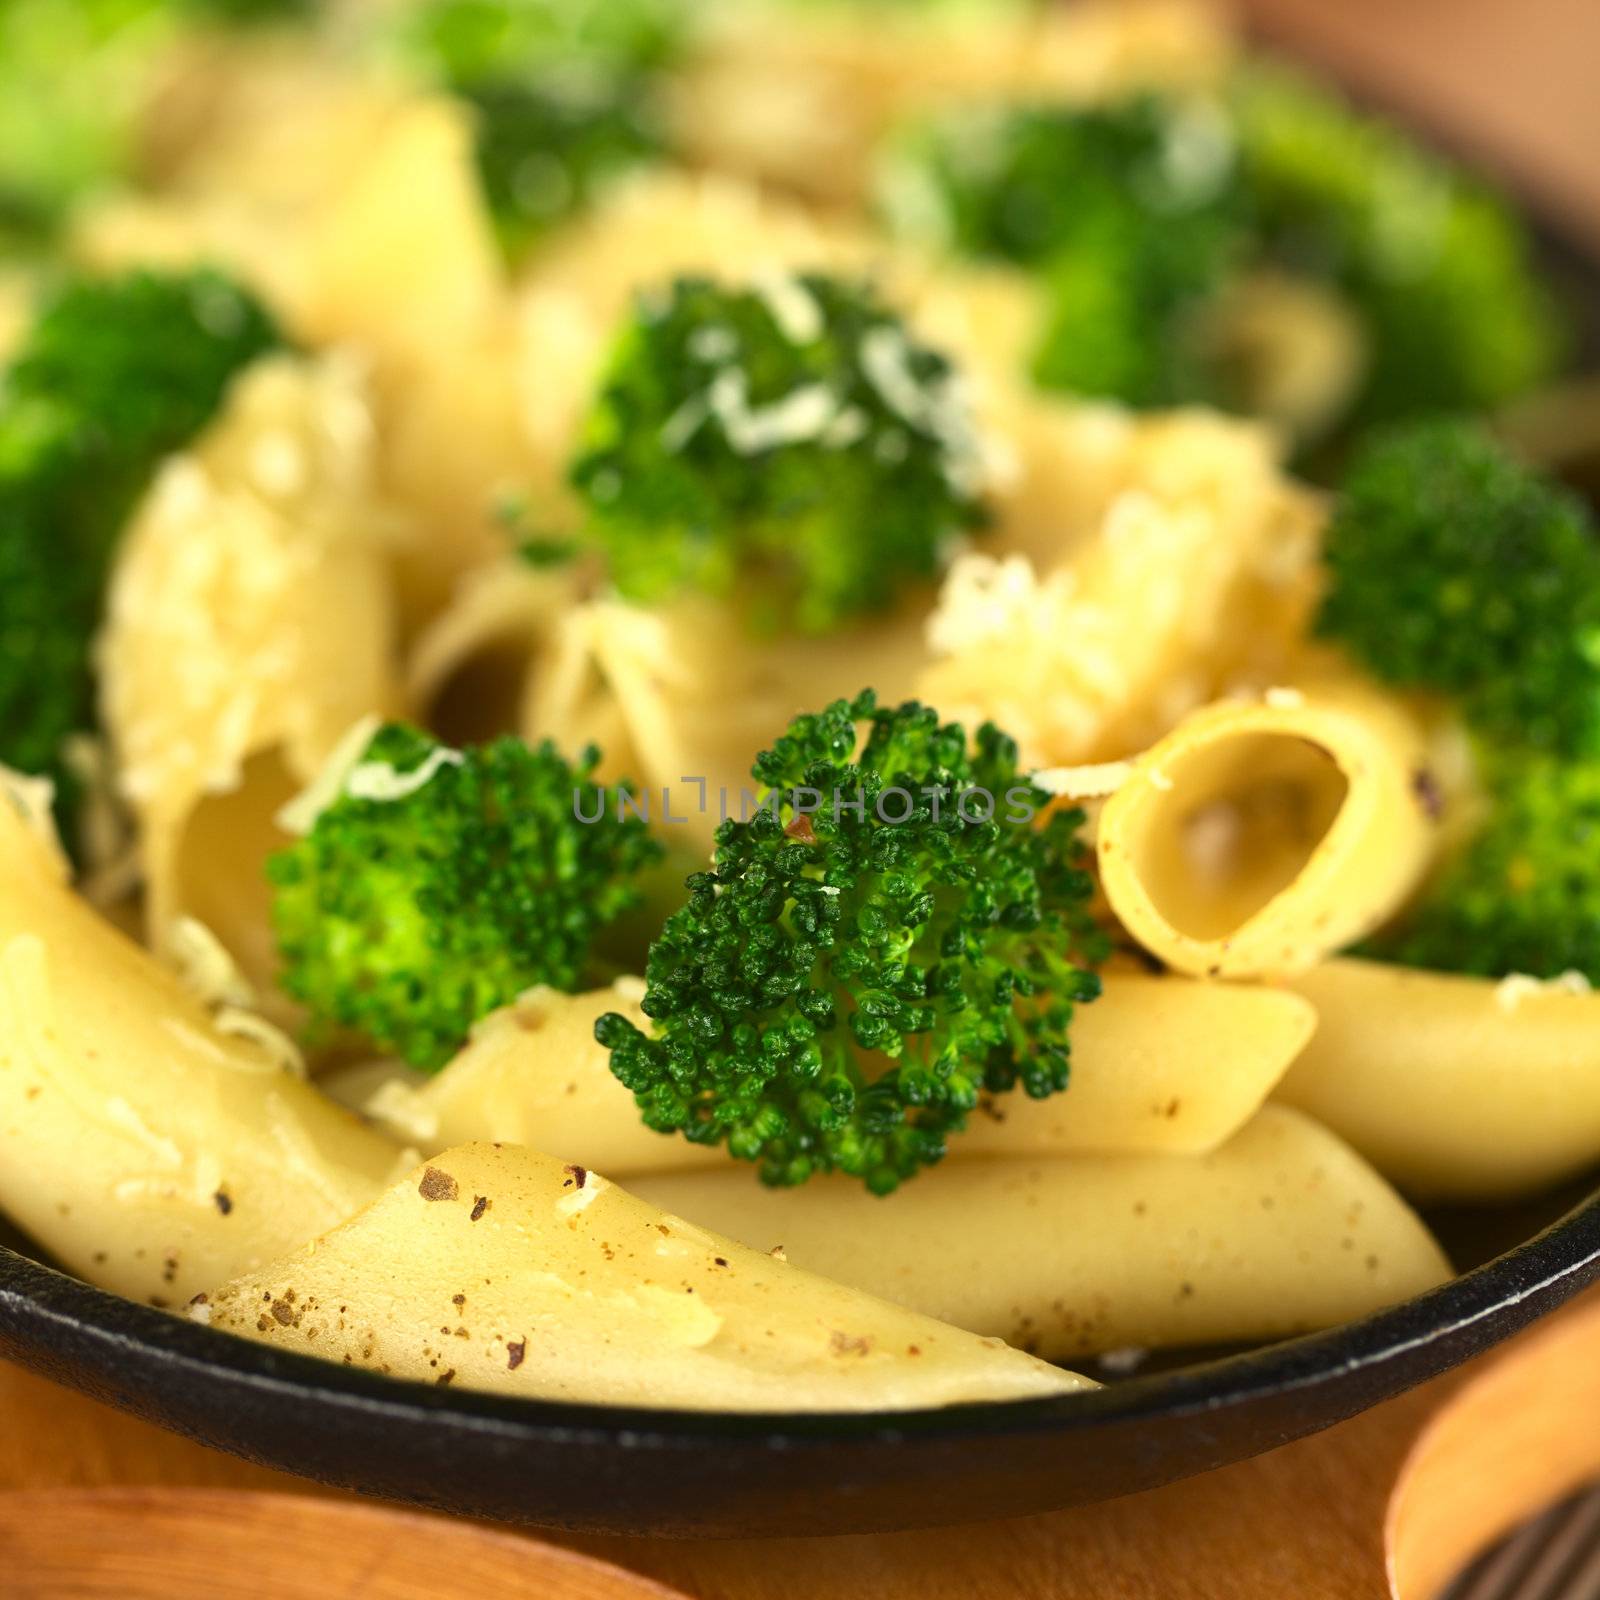 Broccoli and pasta baked with grated cheese and ground pepper (Selective Focus, Focus on the broccoli floret in the front)